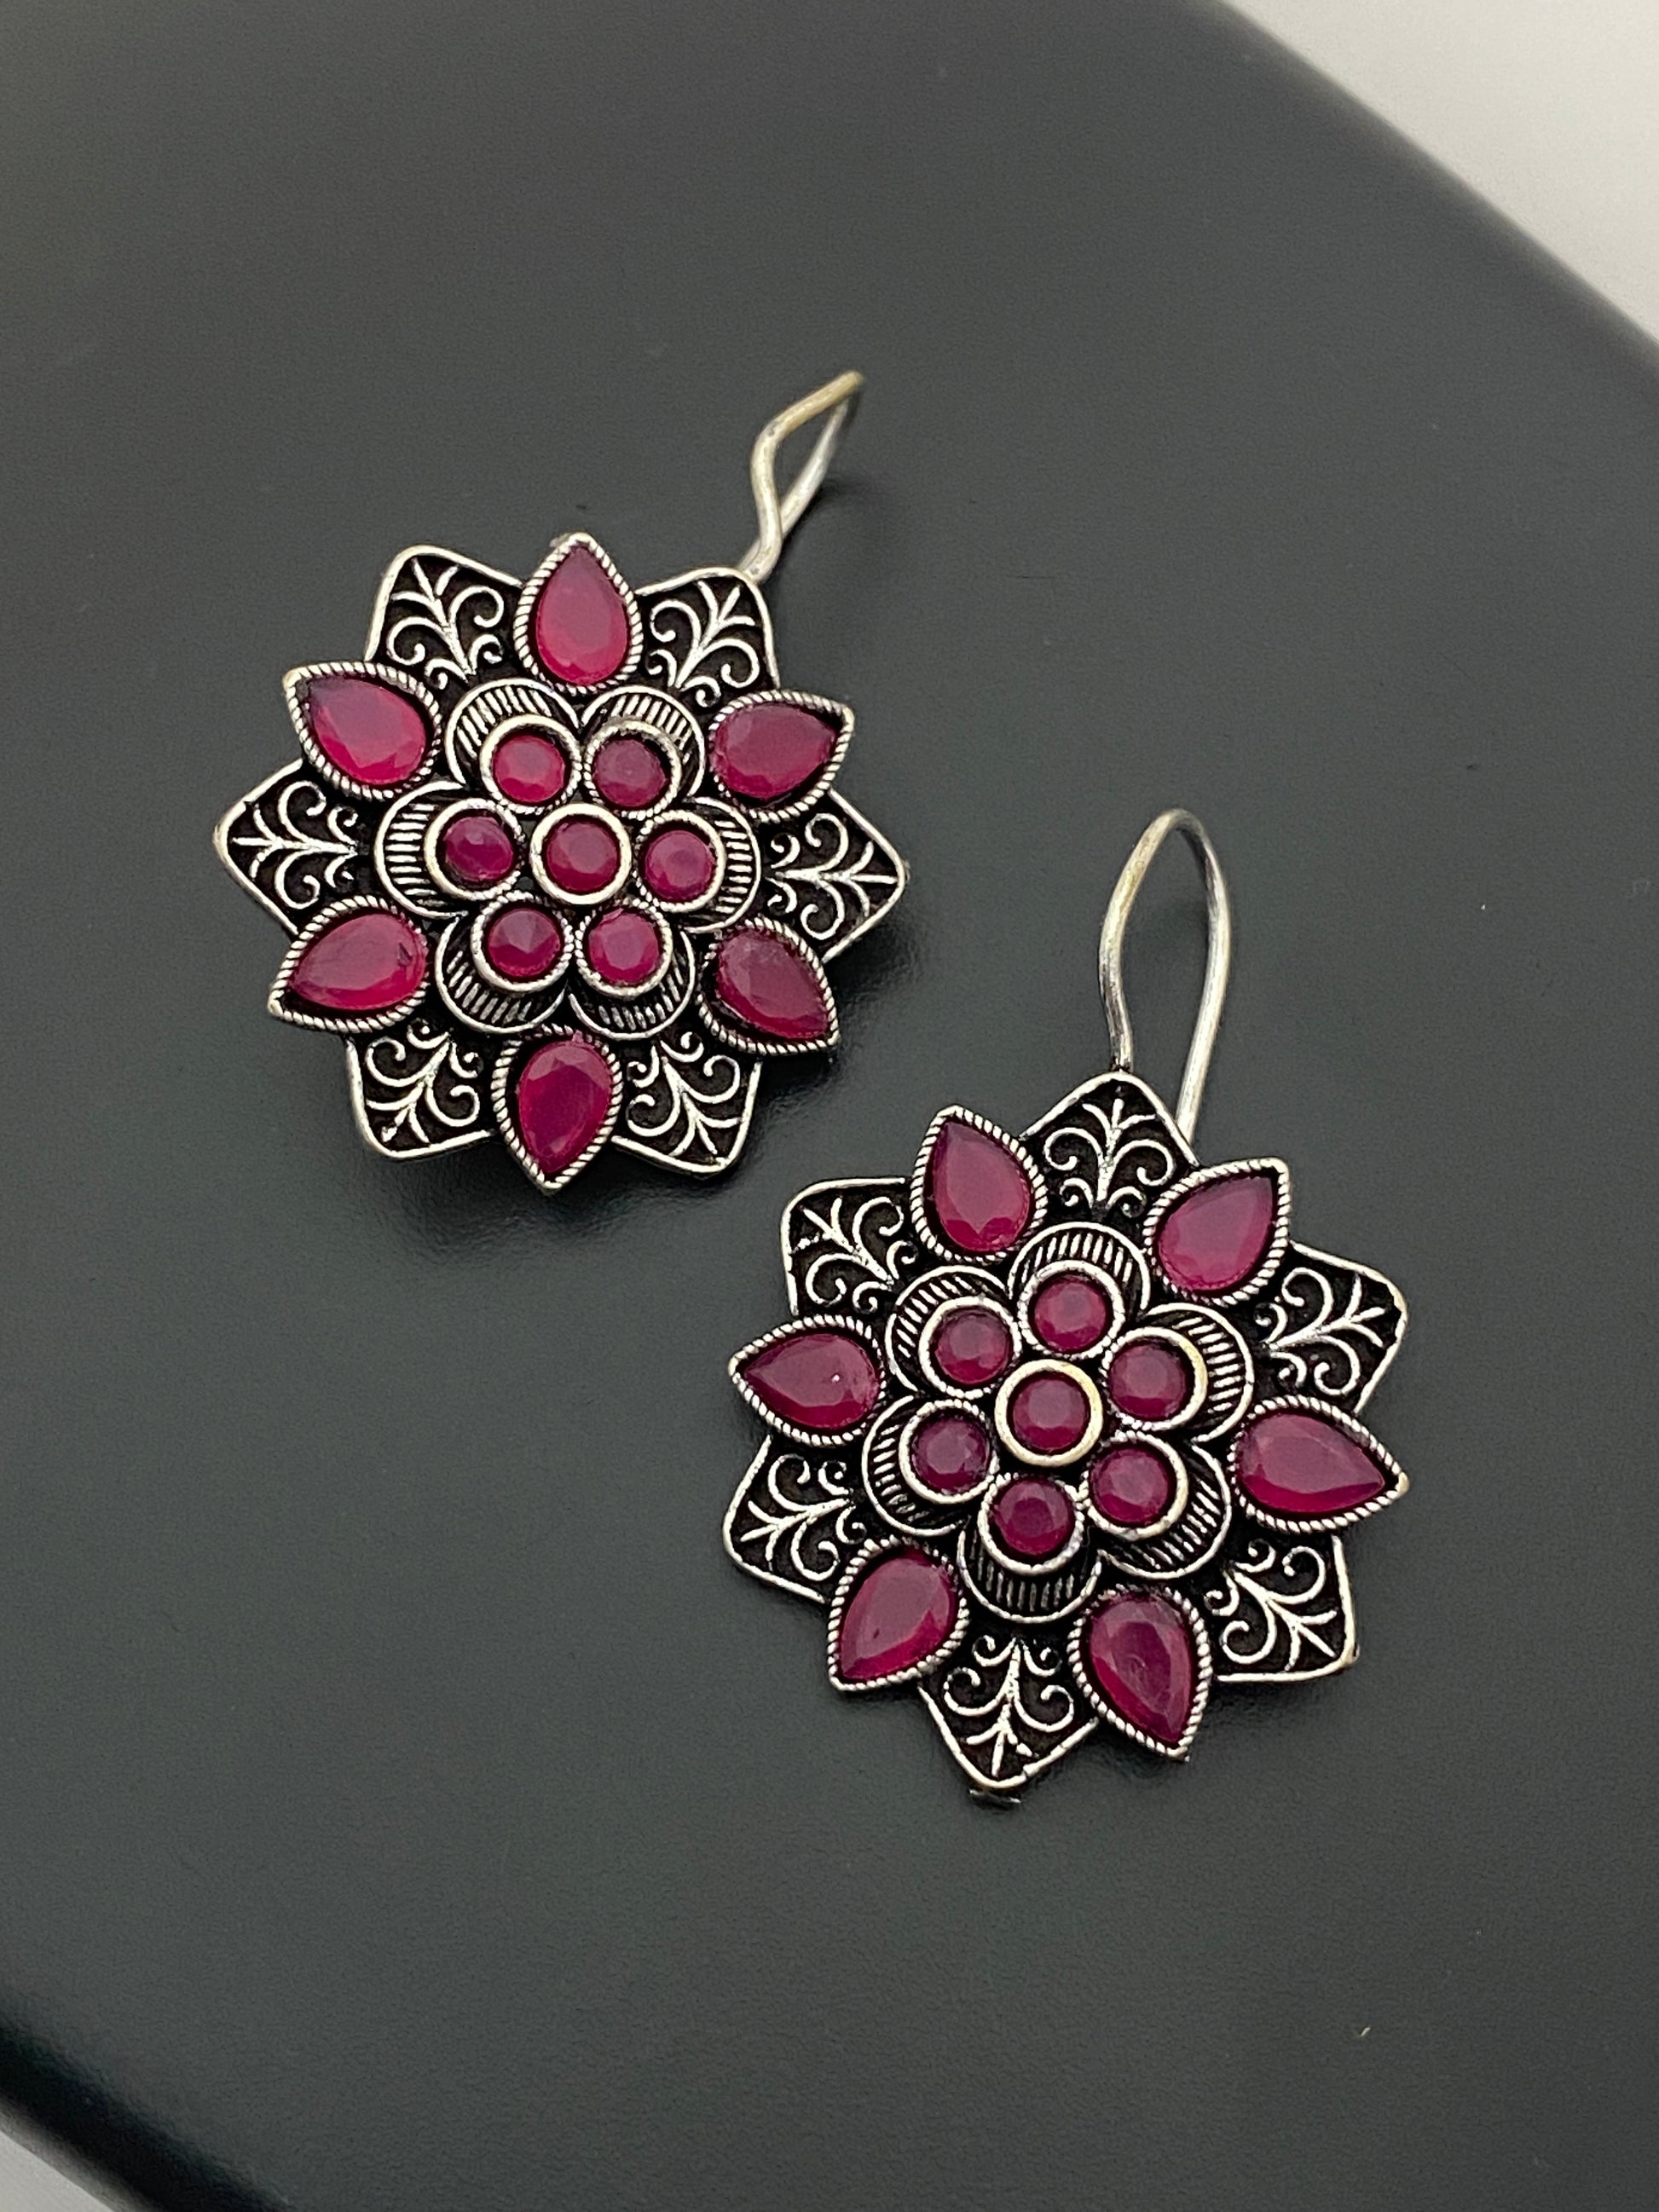 Appealing Pink Color Rounded Floral Designer Oxidized Earrings For Women In Peovia